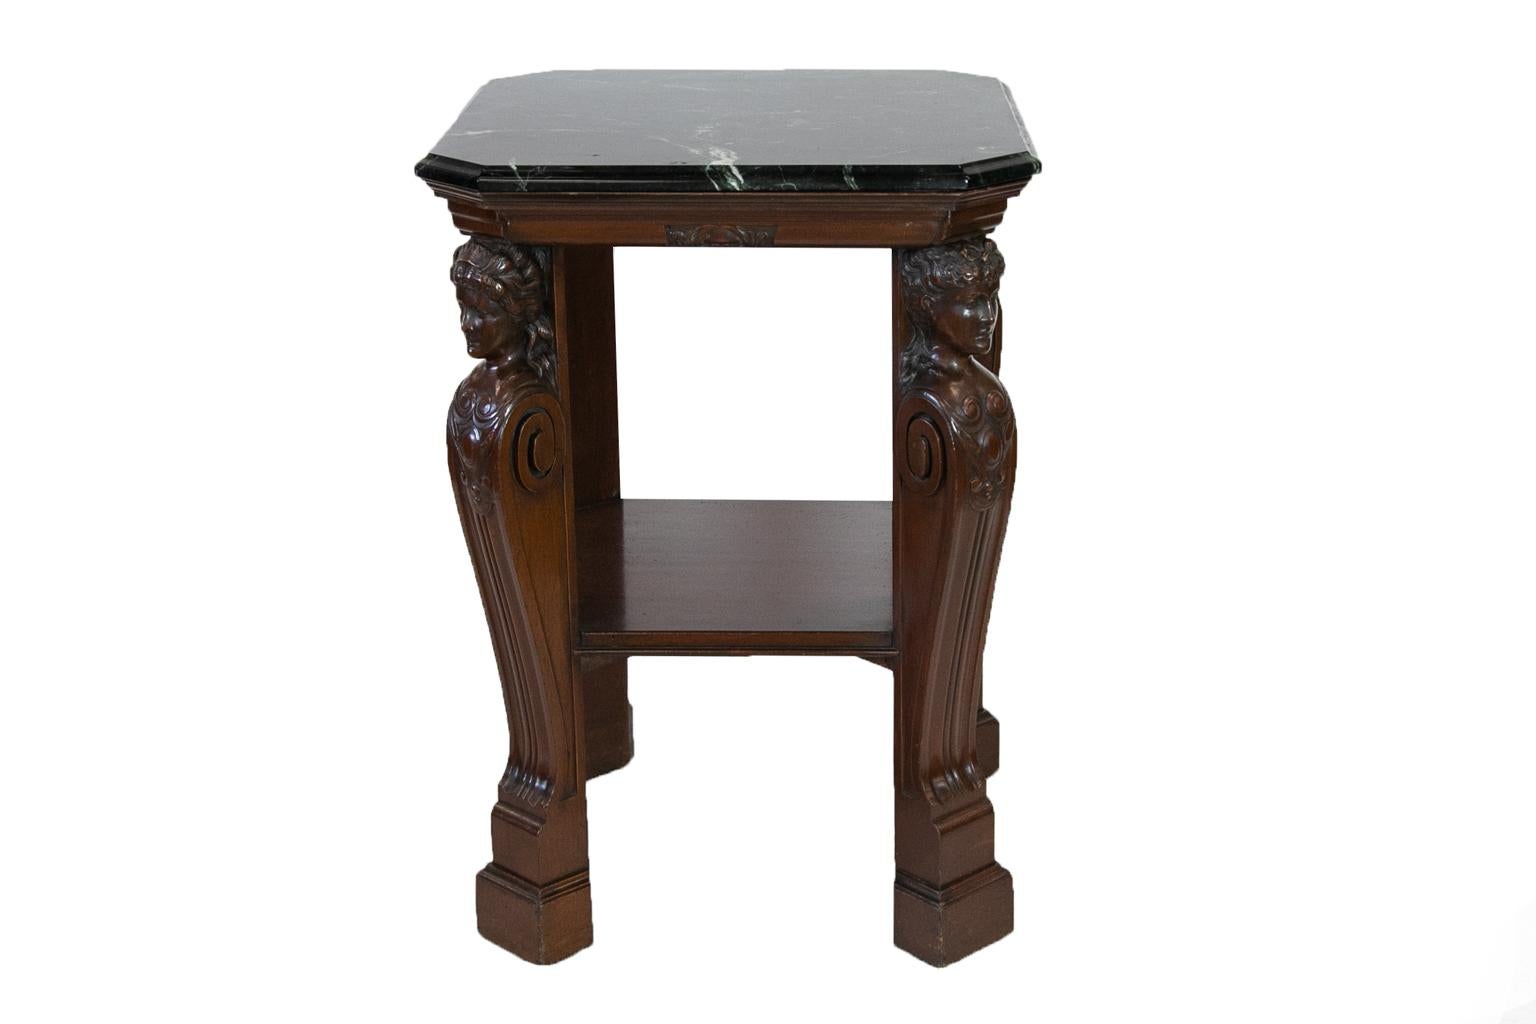 English marble-top center table is solid mahogany and has carved female busts at the top of the legs, which taper down with carved shaping, terminating in rectangular molded plinth feet.